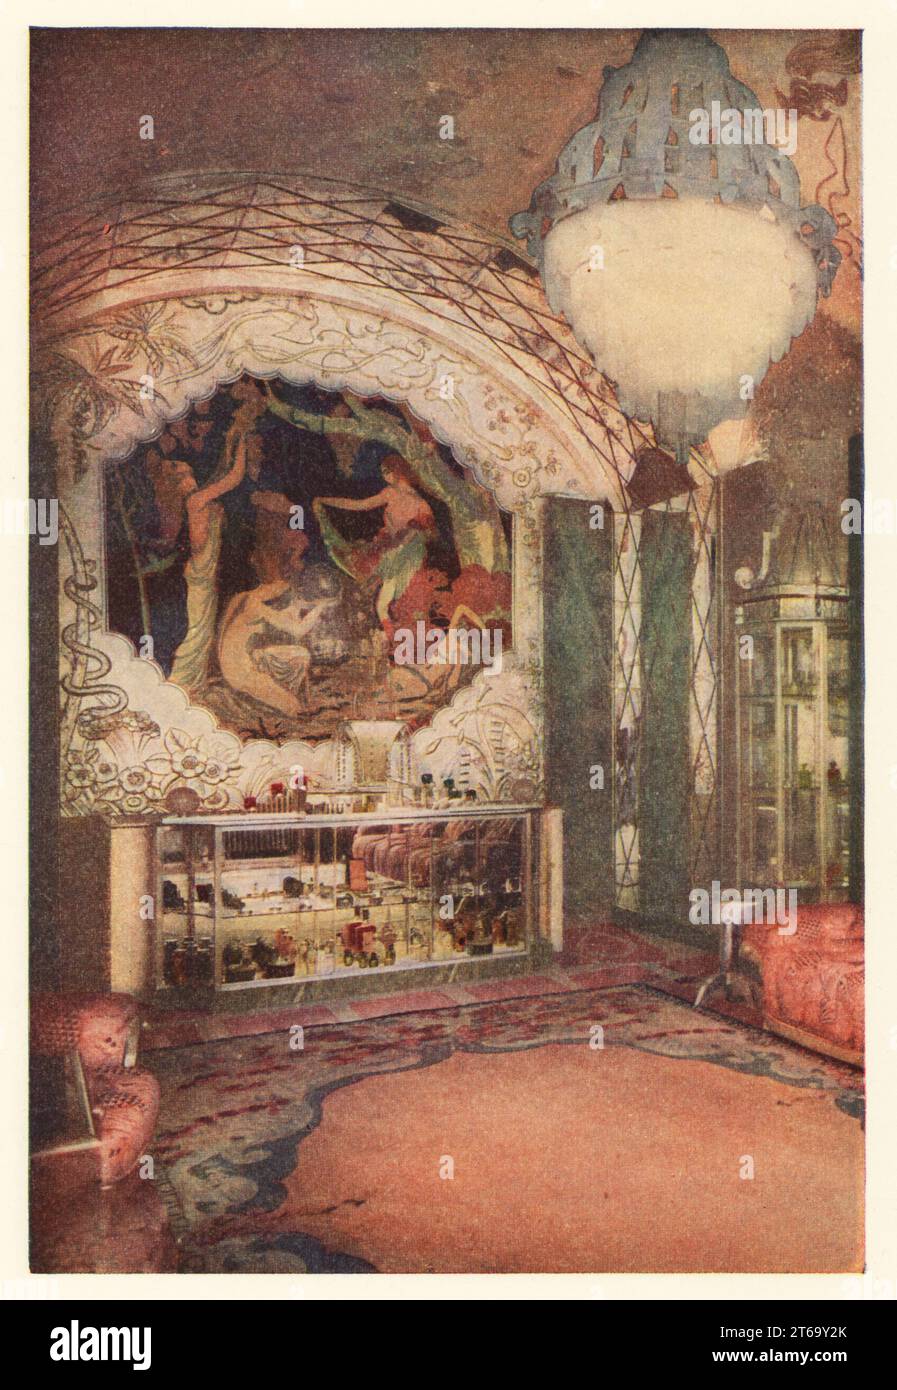 Art Deco interior of the Richard Hudnut shop, rue de la Paix, Paris, 1928. A glass case with perfume bottles under a mural painted by the lacquerist Jean Dunand, pink ceiling and glass chandelier. Smithsonian-process colour print from Richard le Galliennes Romance of Perfume, Hudnut, New York, 1928. Stock Photo